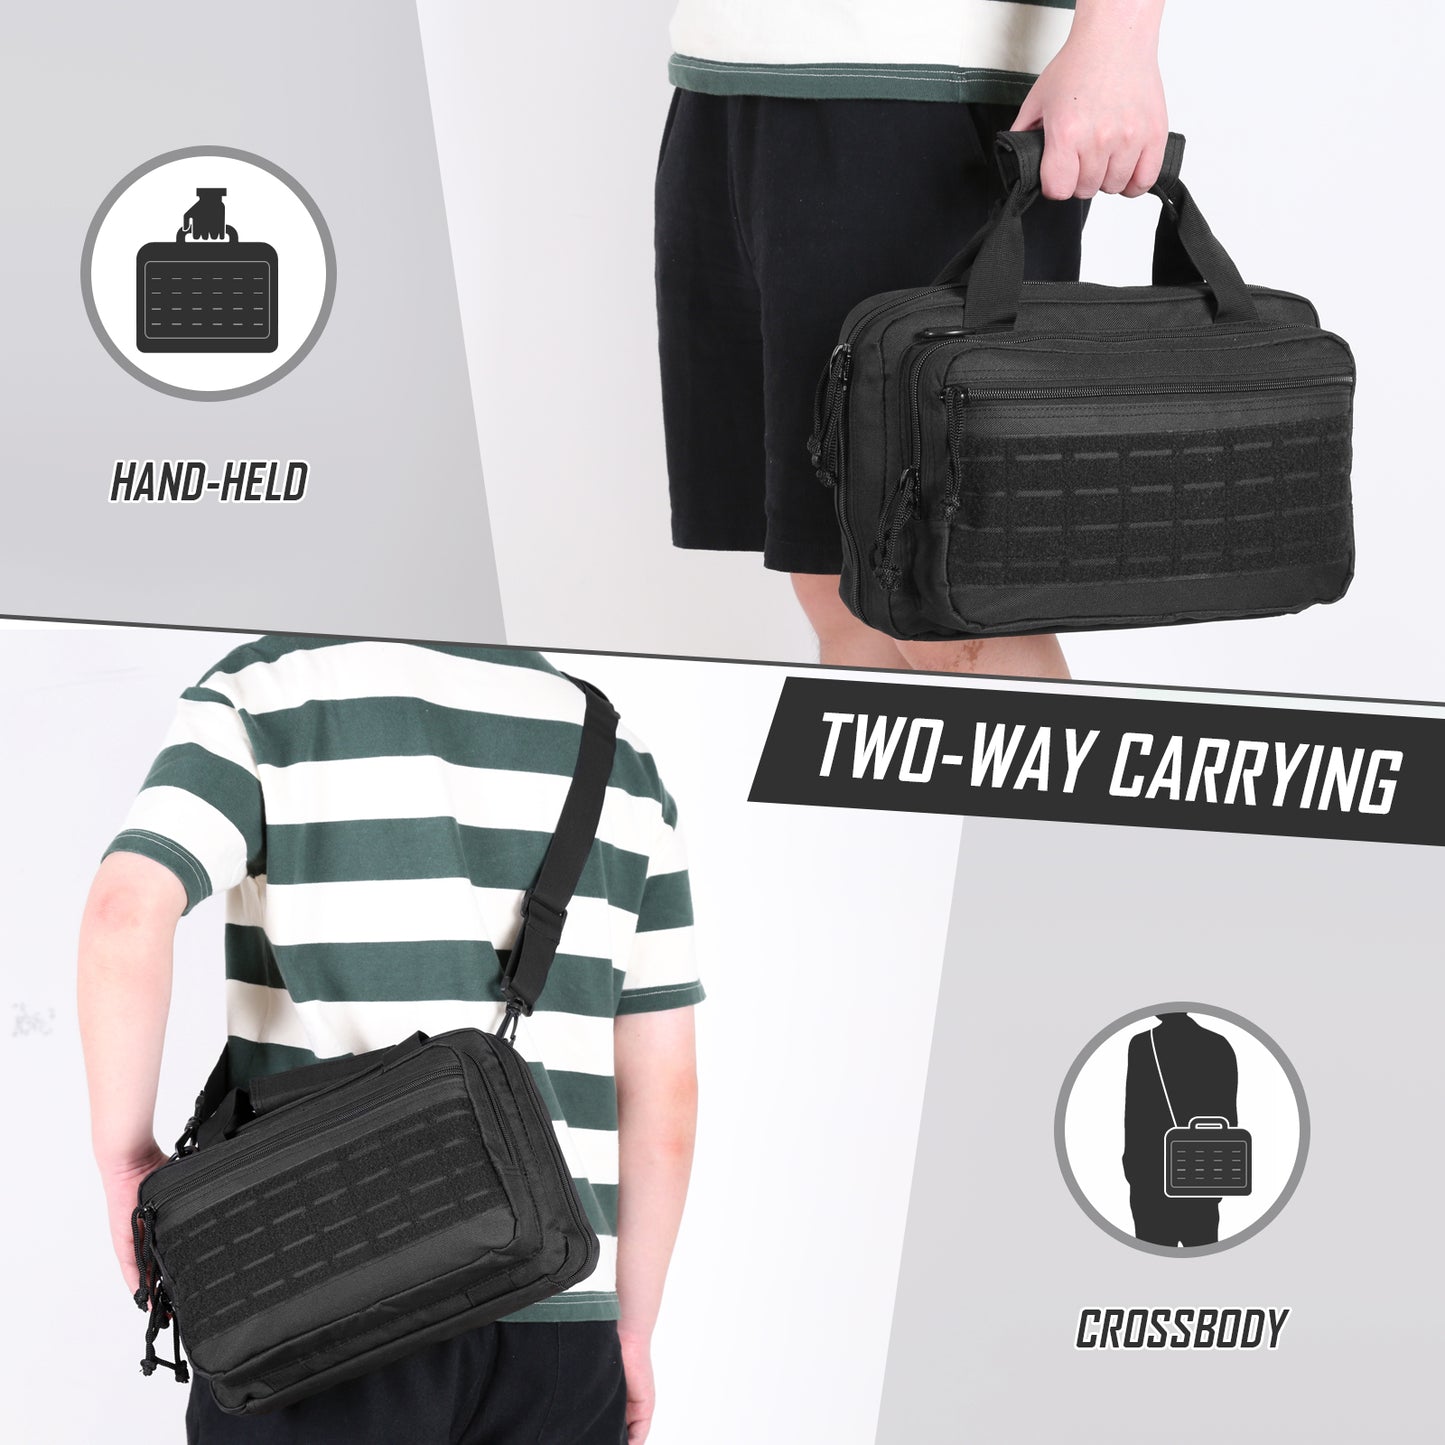 Double-Capacity Pistol Bag with Ammo Compartments, Small Tactical Soft Pistol Carrier for the Shooting Range GBPB001